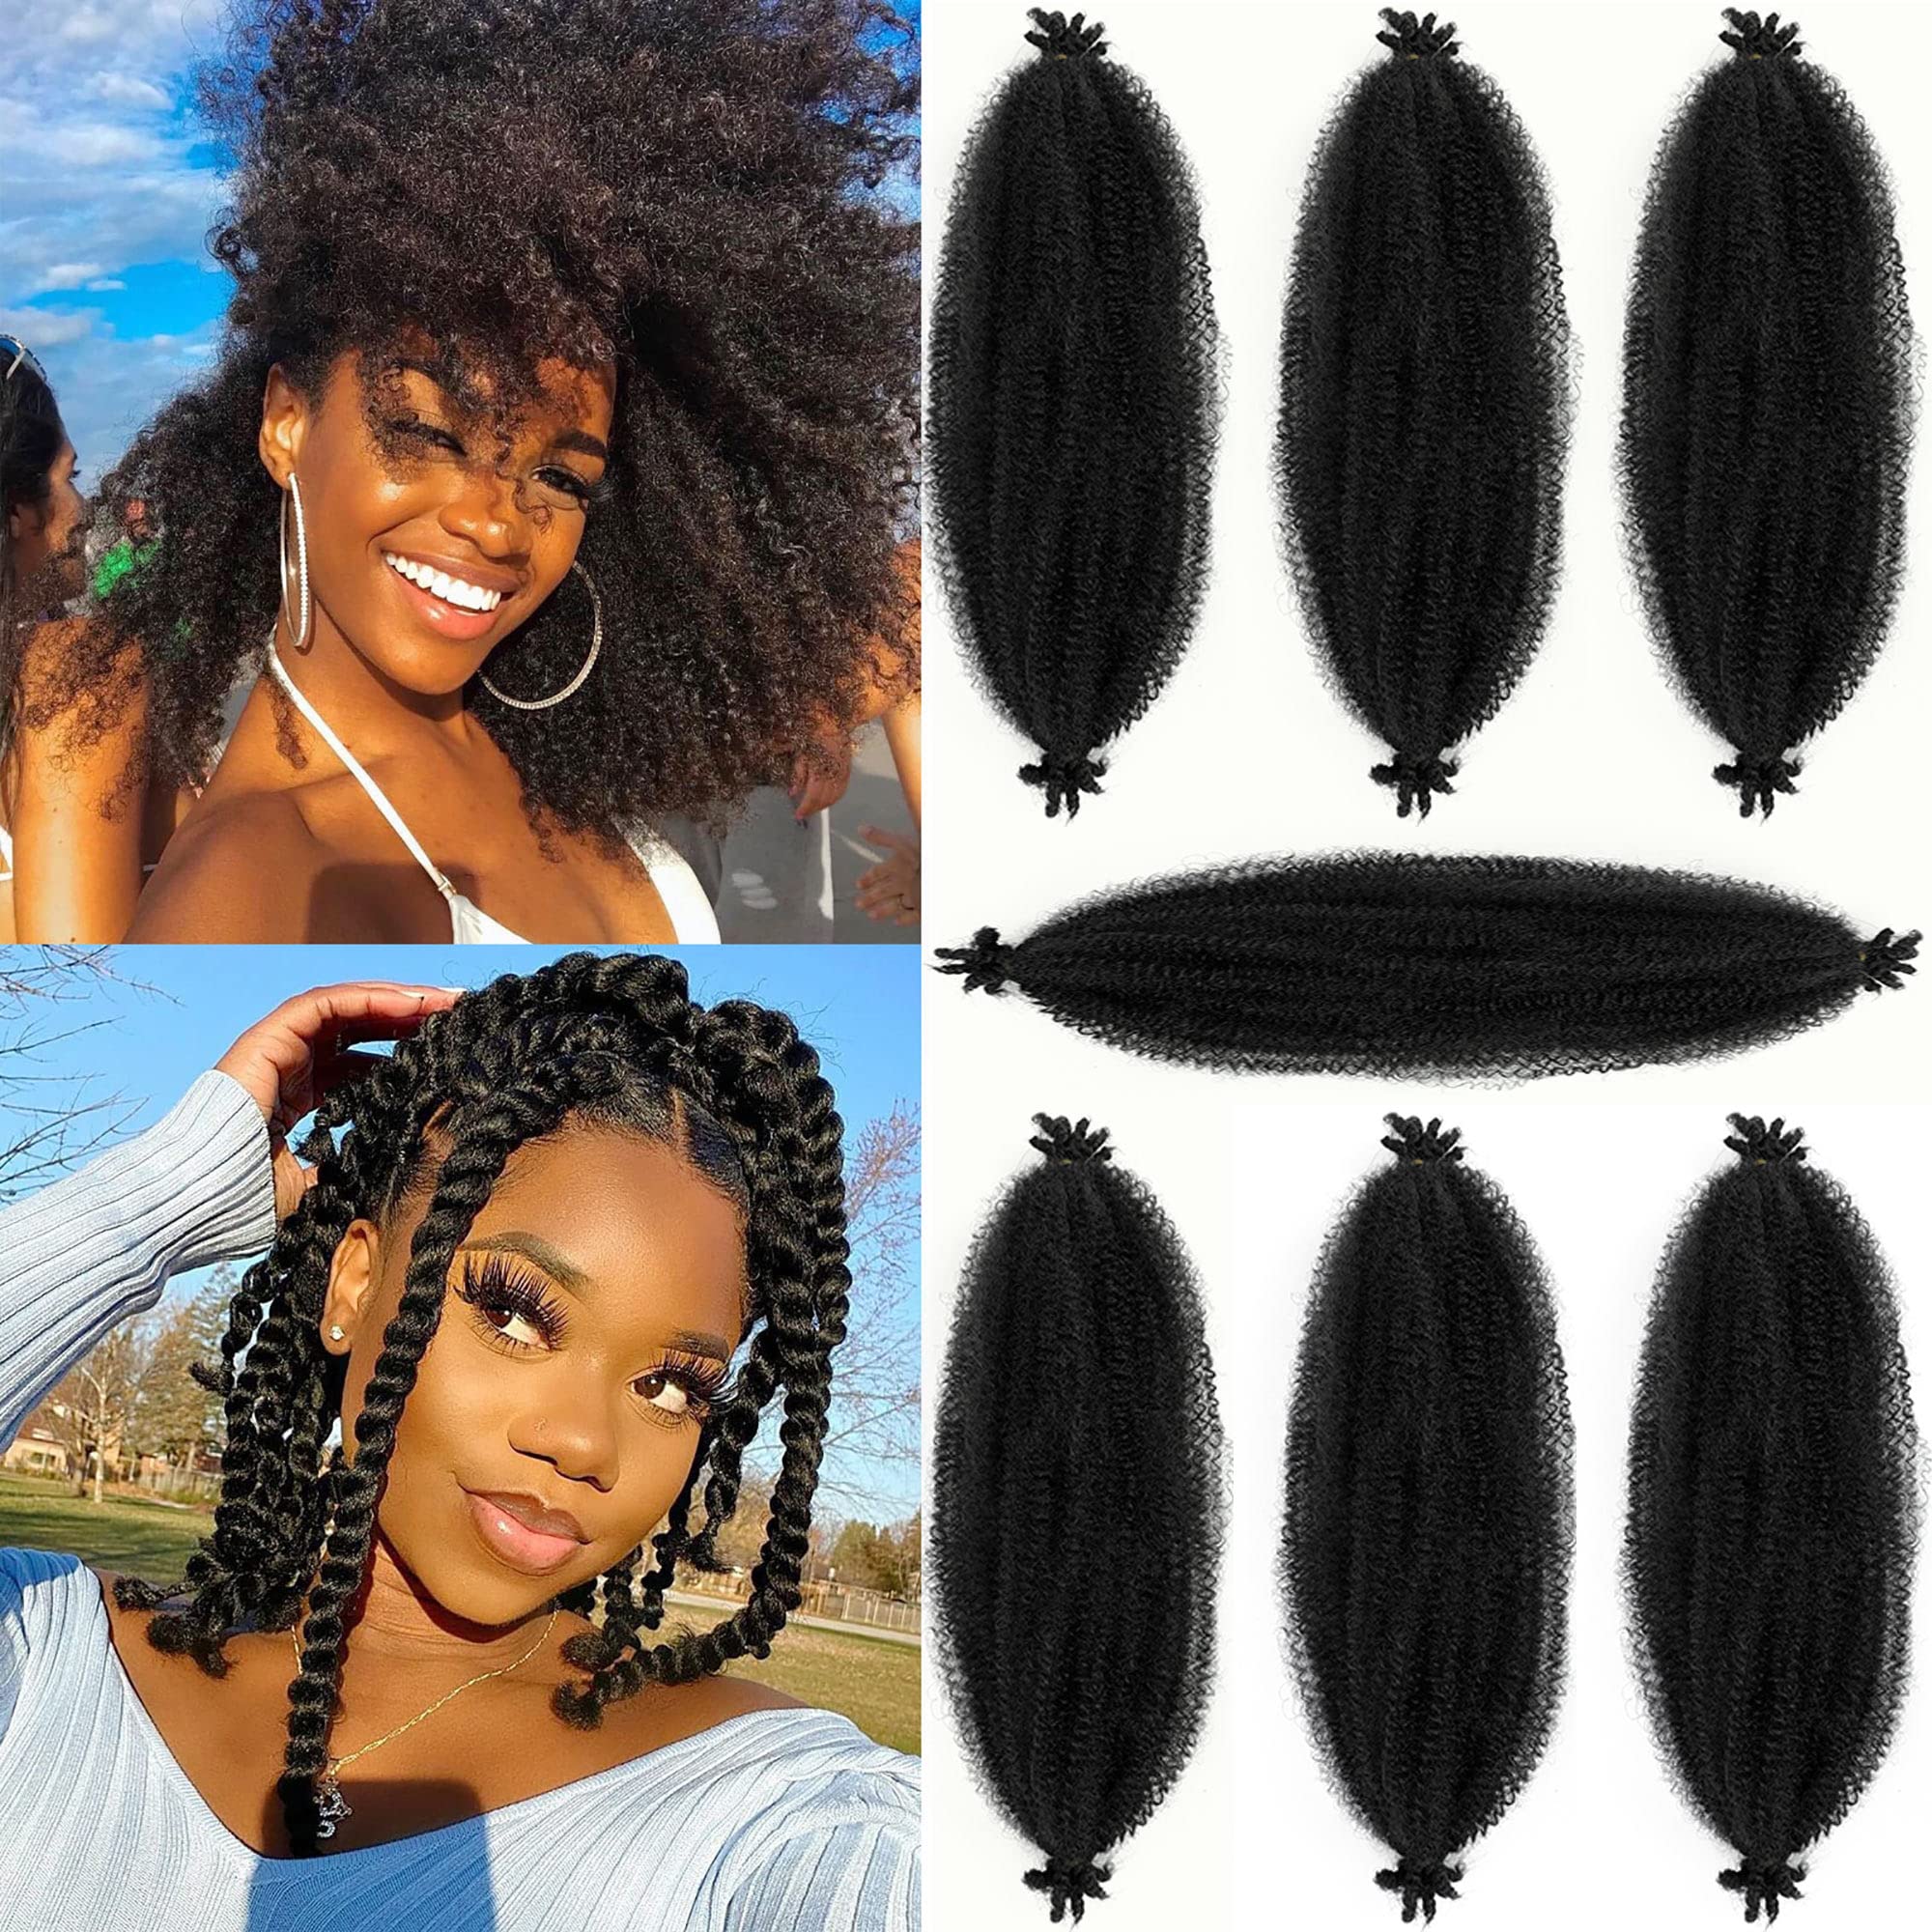 Pre-Fluffed Spring Twist Hair, Pre-Stretched Marley Twist Braiding Hair, 16  Inch 7 Packs Soft Springy Afro Kinky Braiding Hair For Black Women Crochet  Hair, Twisted Up Crochet Braids(16inch,7packs,1B#) 16 Inch(Pack of 7)